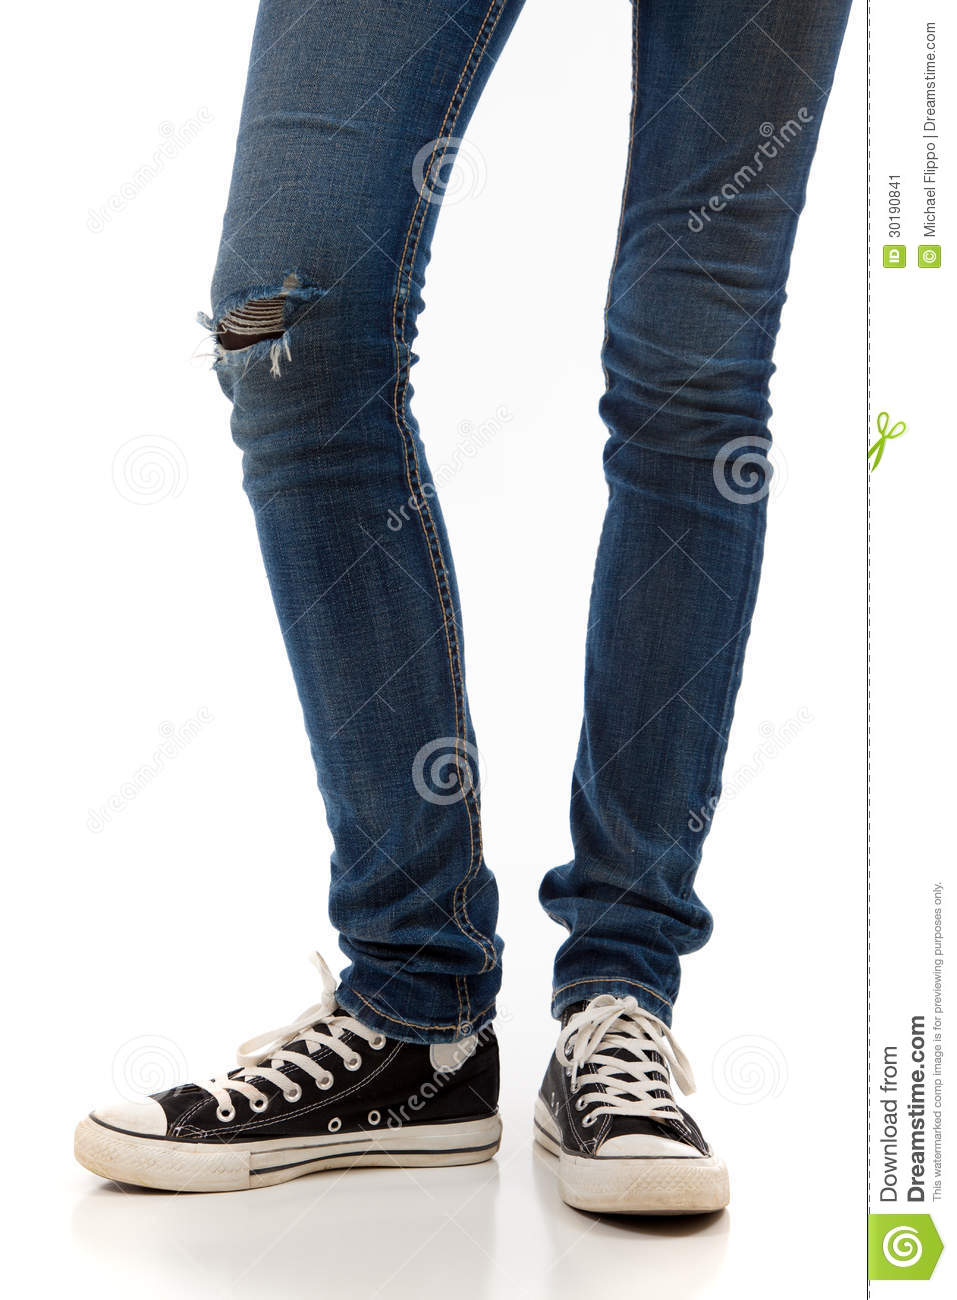 Legs With Jeans And Retro Black Sneakers On A White Background Stock